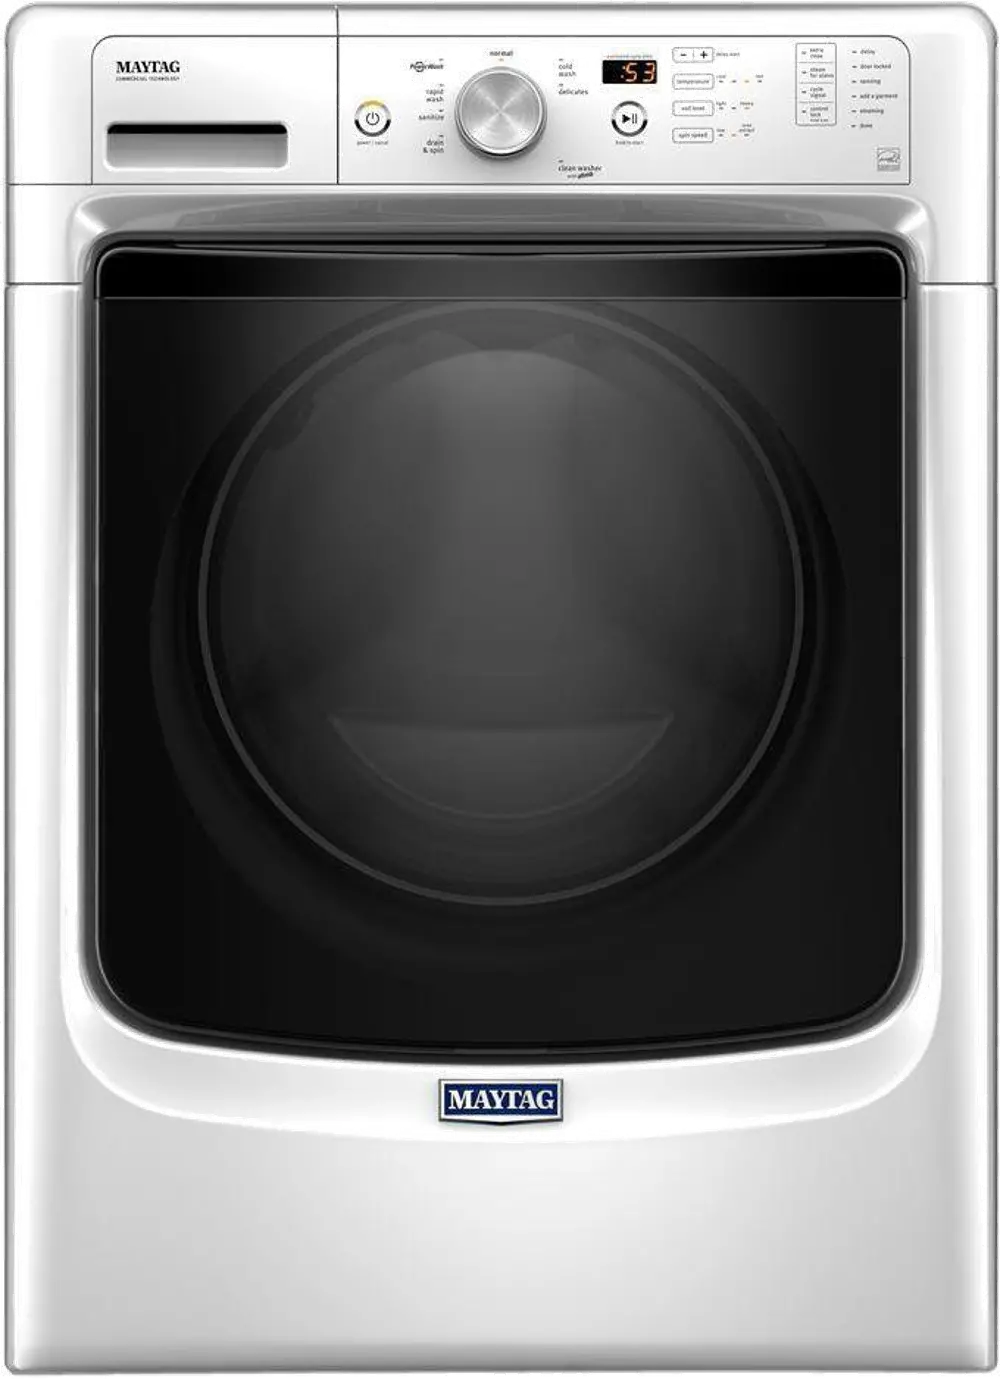 MHW3505FW Maytag Front Load Washer with Rapid Wash Cycle - 4.3 cu. ft. White-1